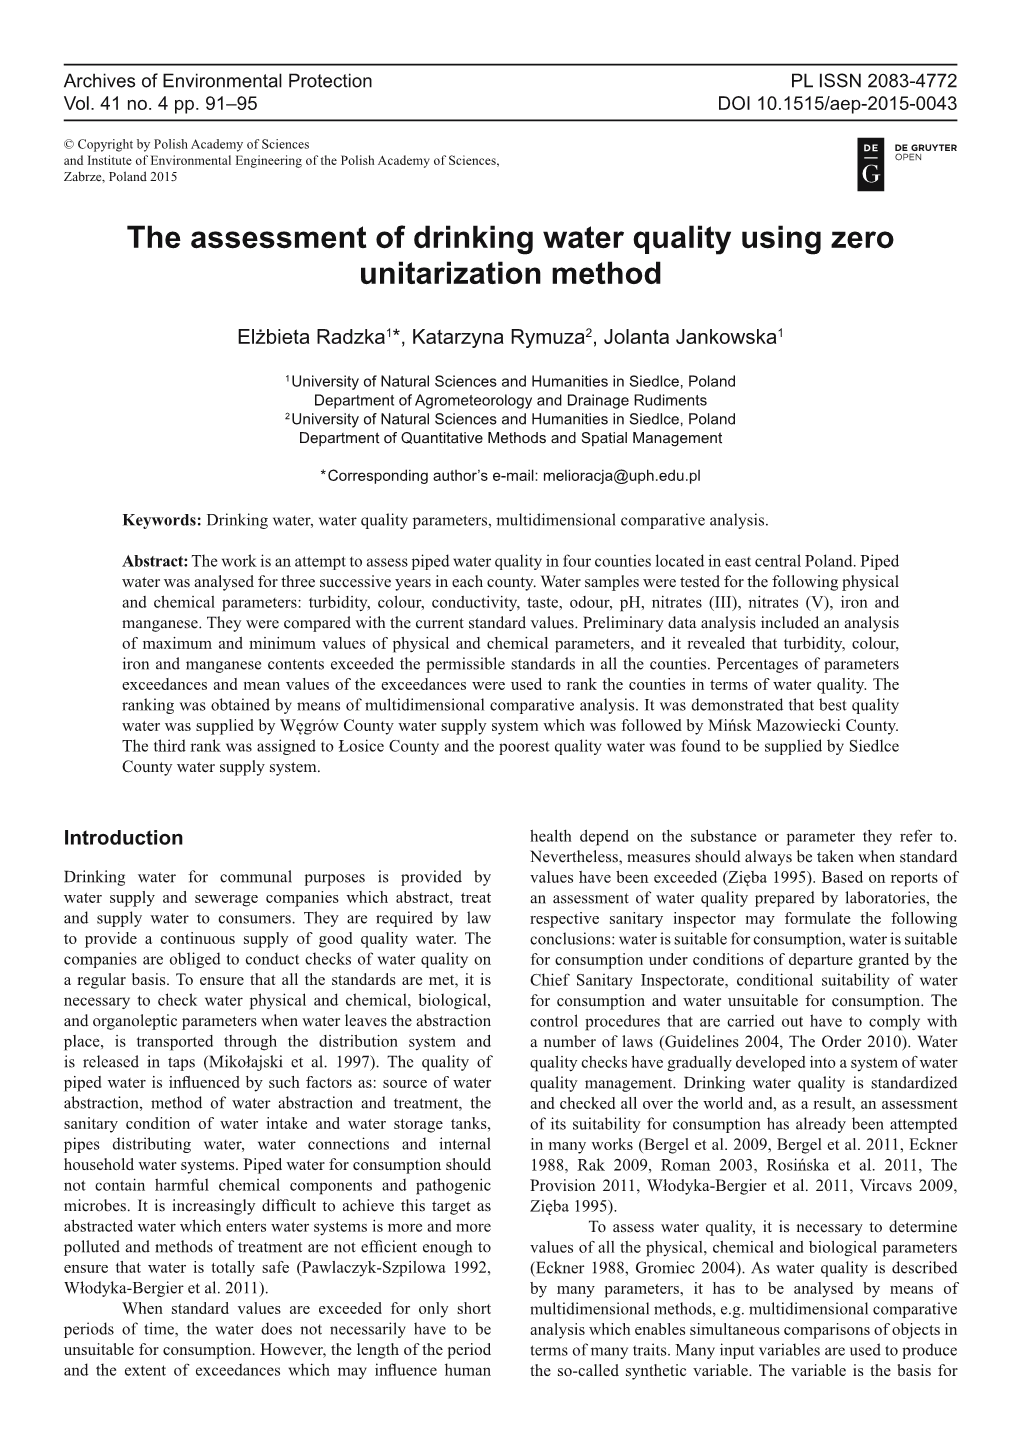 The Assessment of Drinking Water Quality Using Zero Unitarization Method